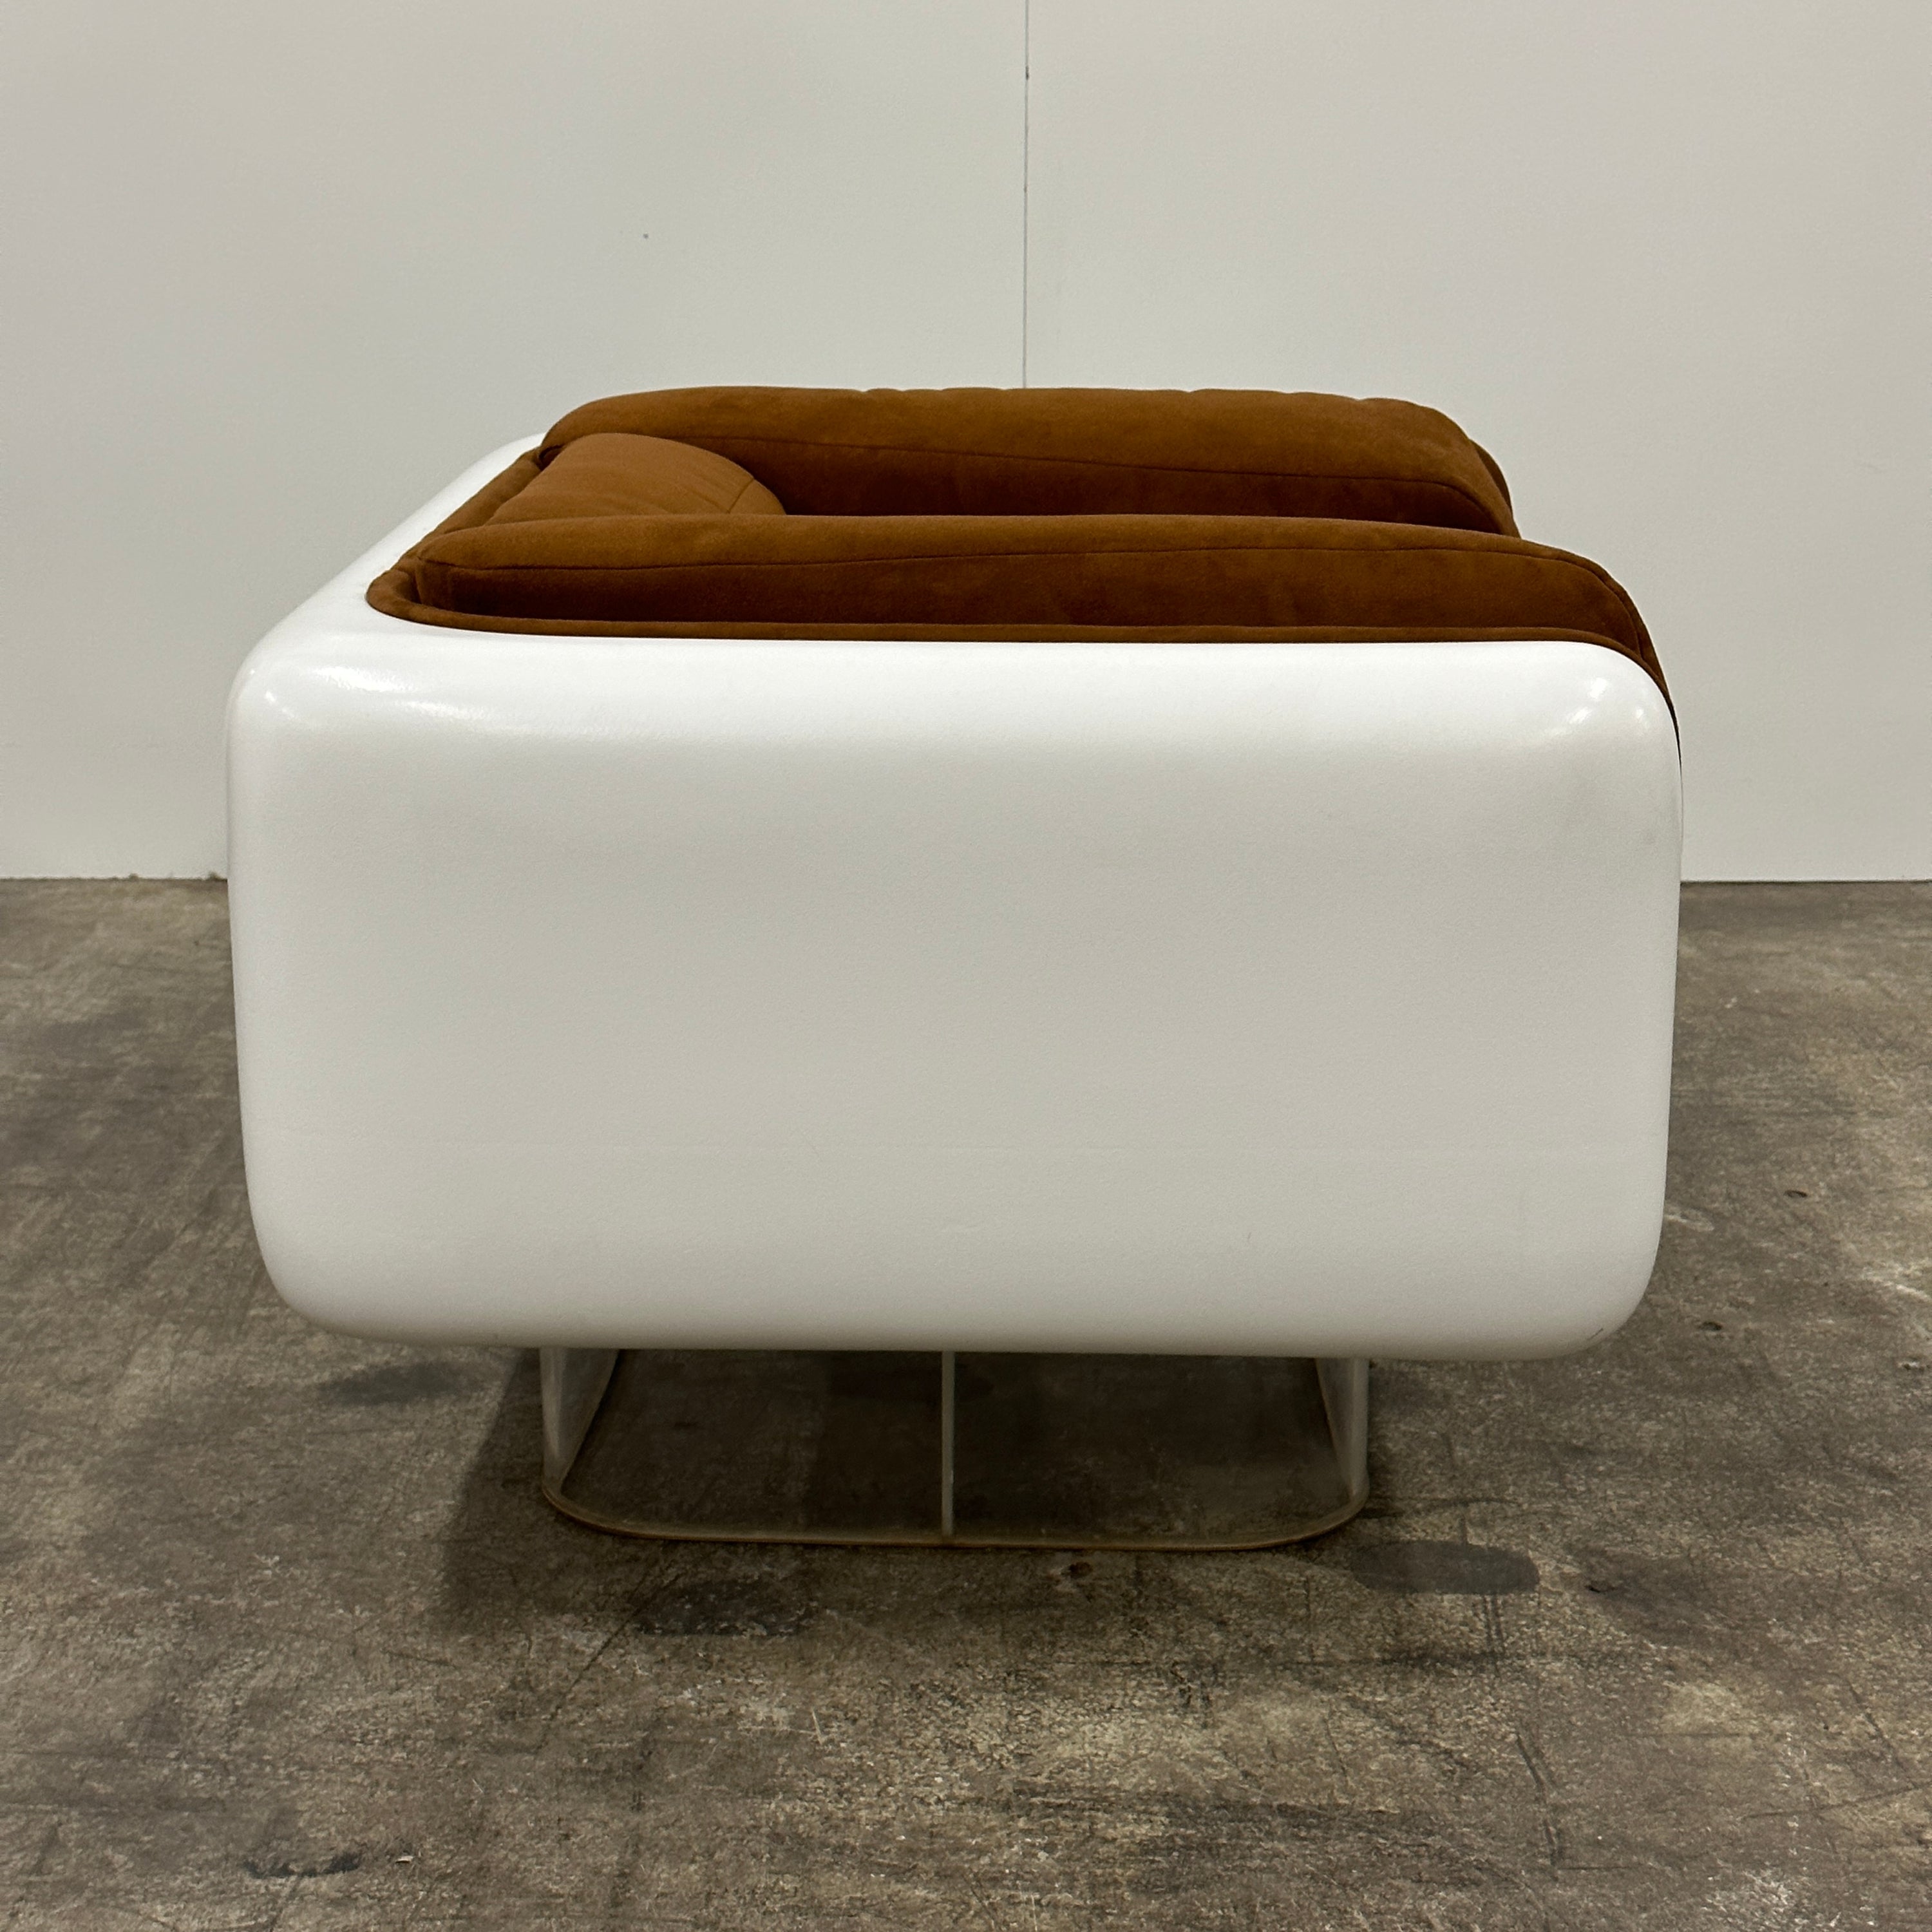 Soft Seating Lounge Chair by William Andrus for Steelcase